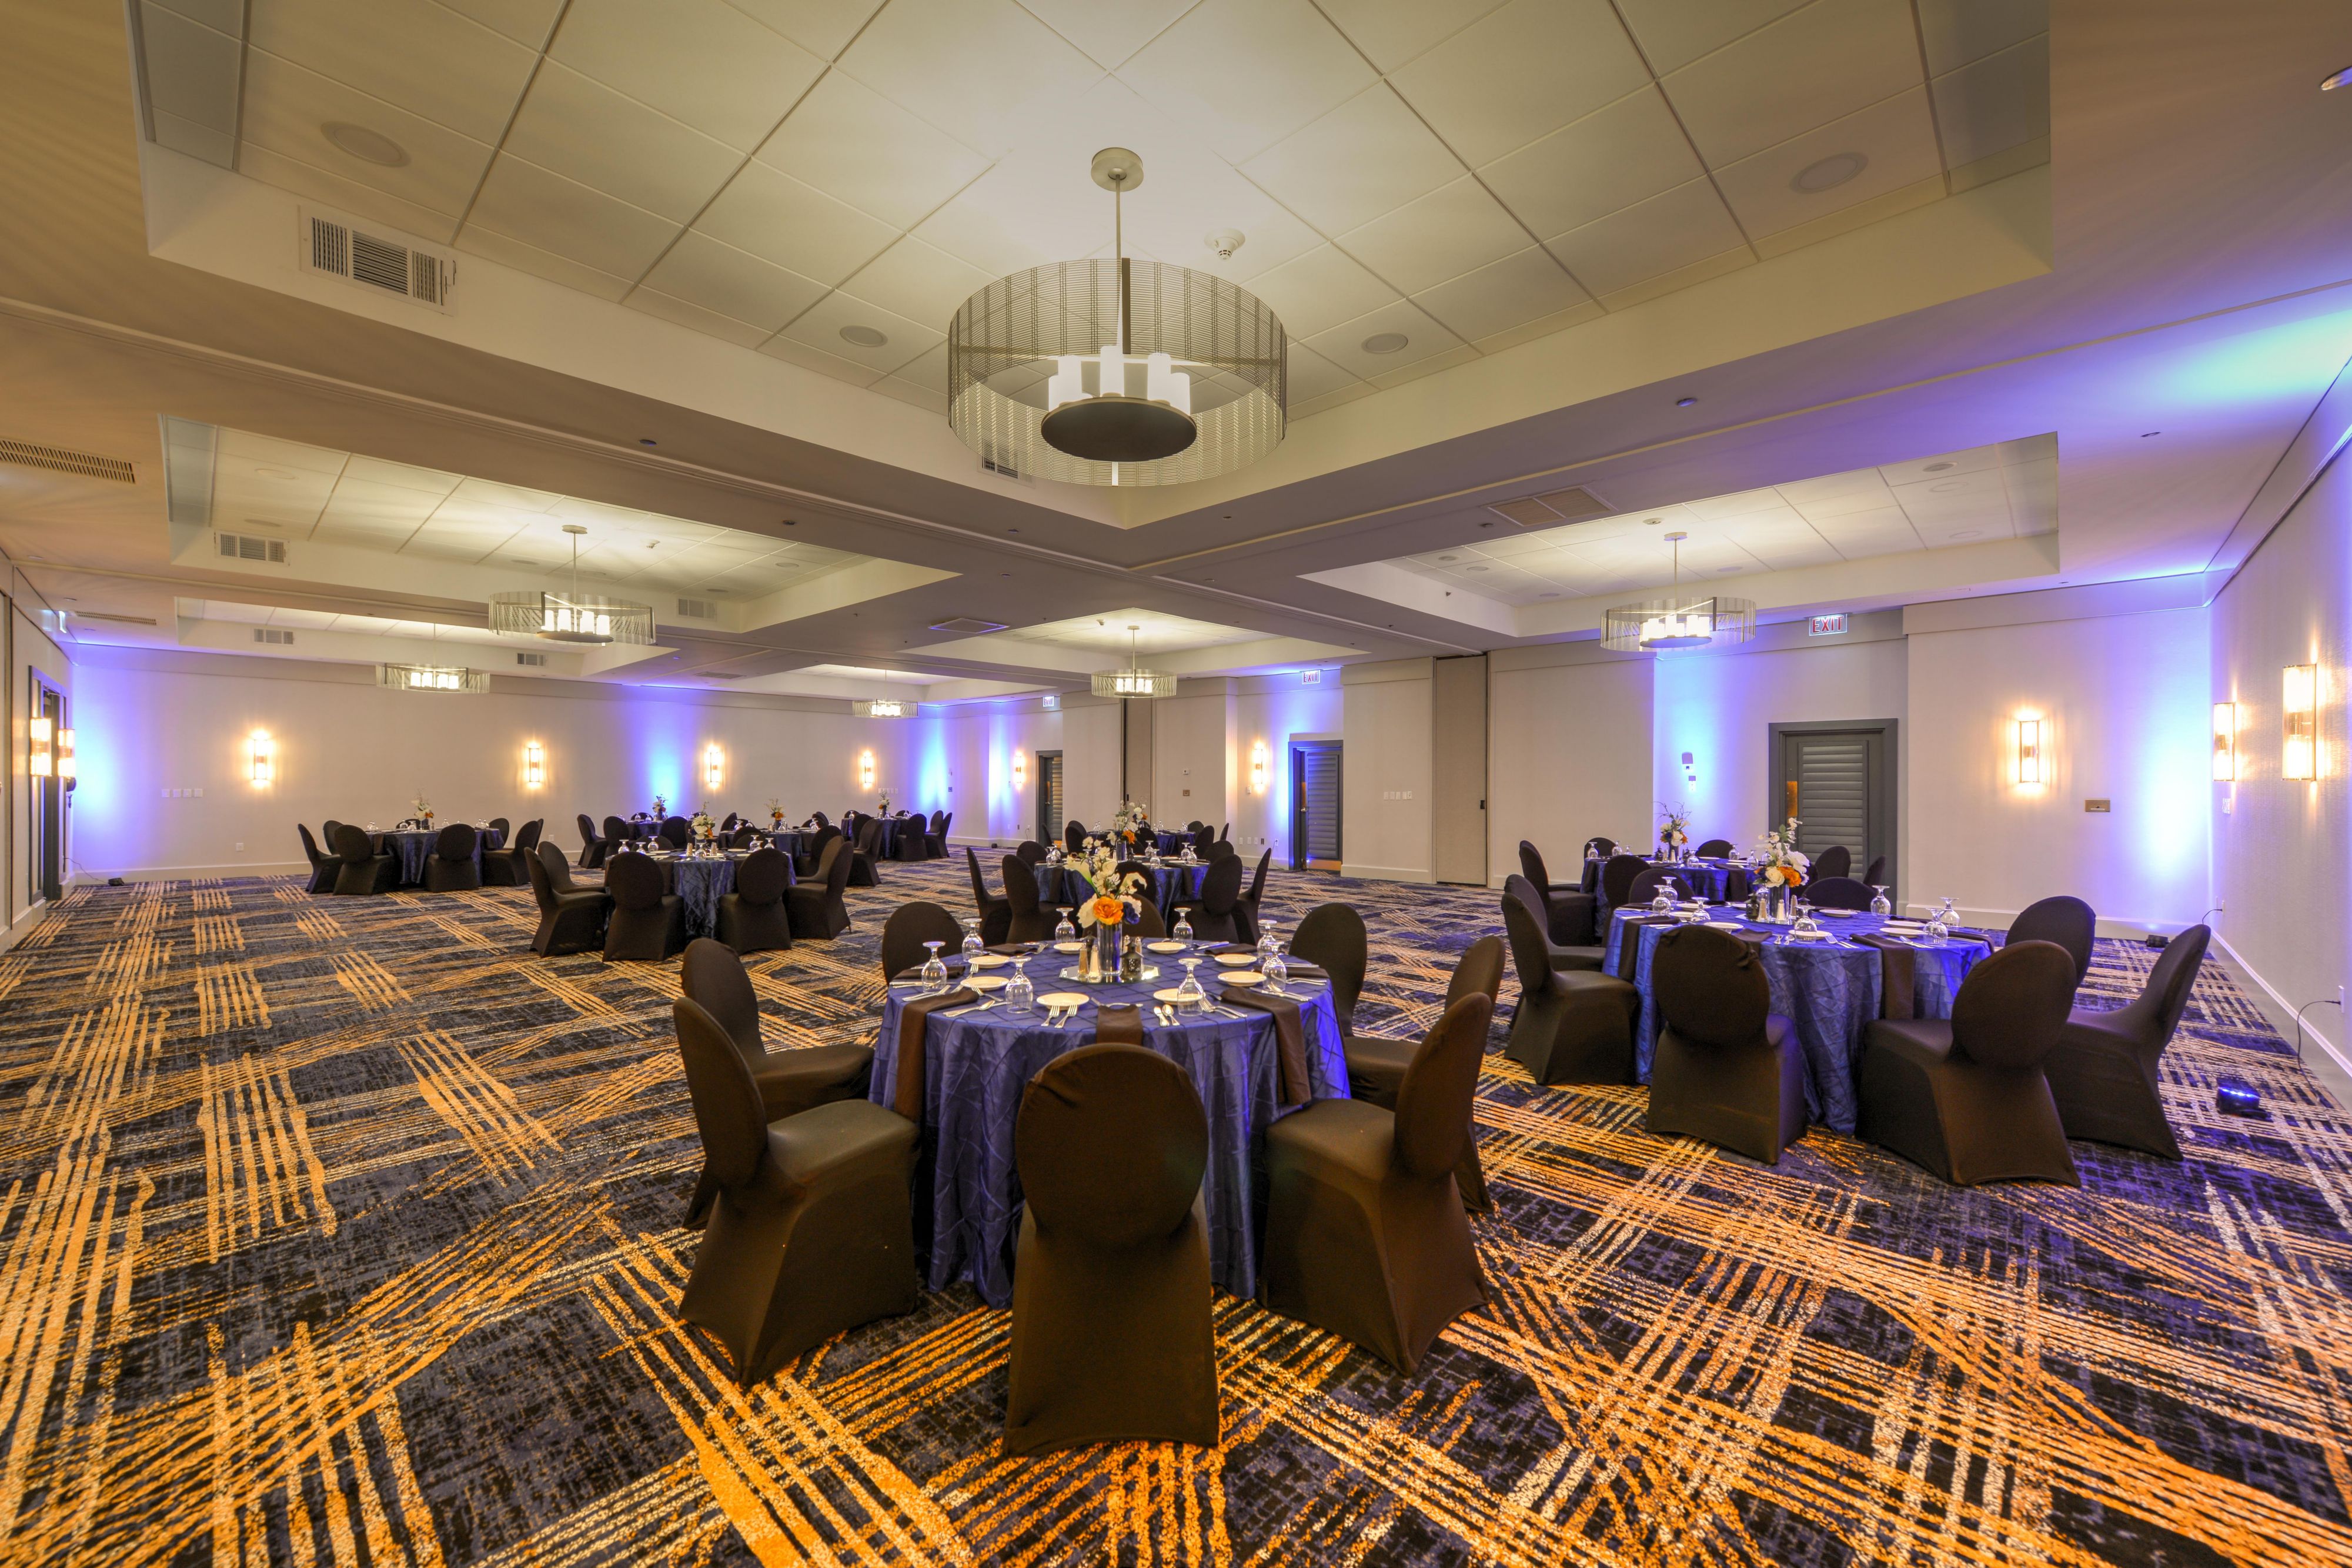 Special event space for up to 300 guests